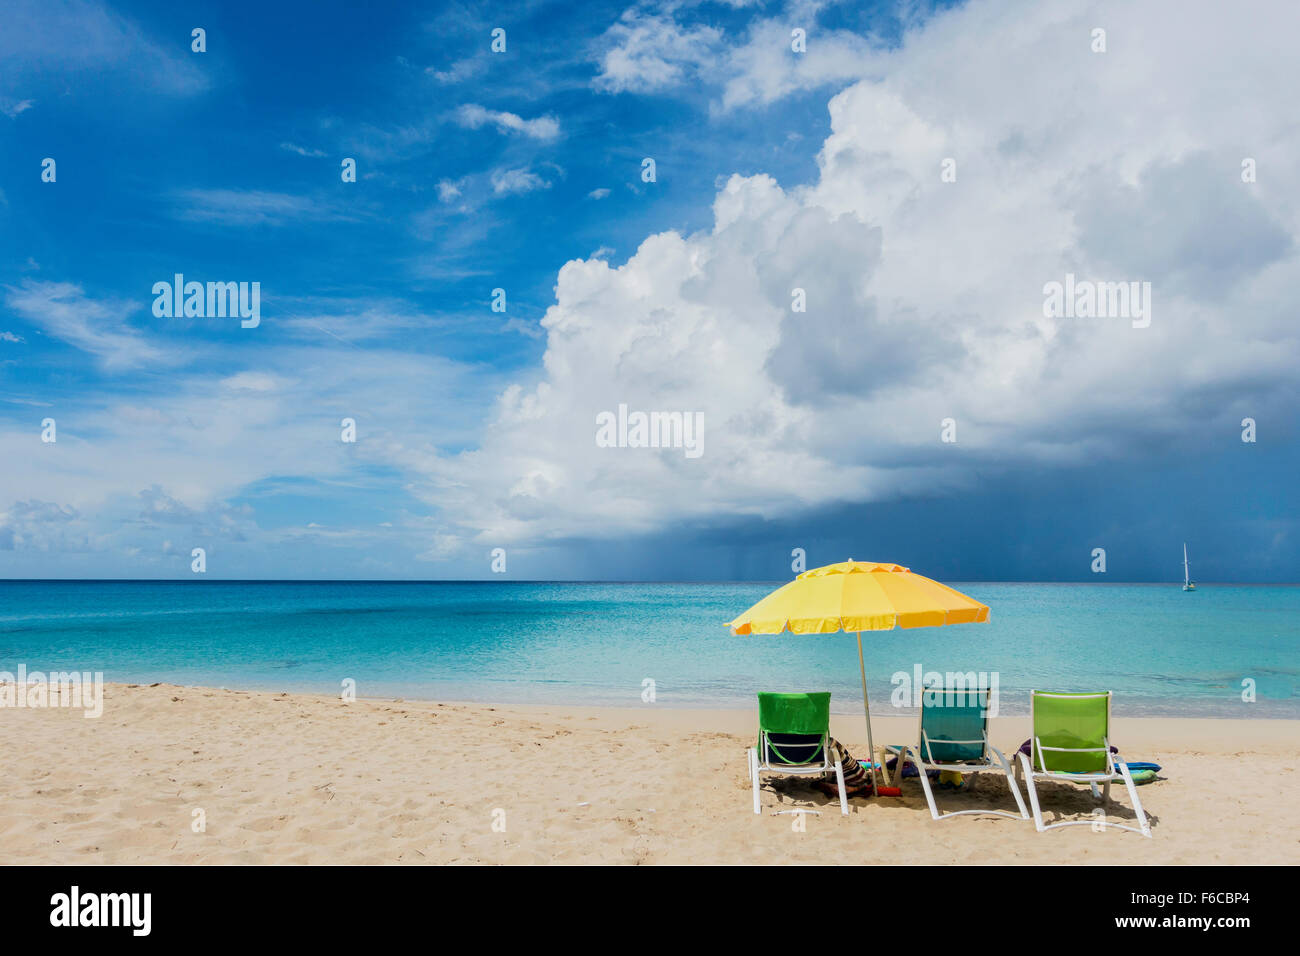 three-beach-chairs-under-a-yellow-umbrella-look-out-on-a-tropical-F6CBP4.jpg